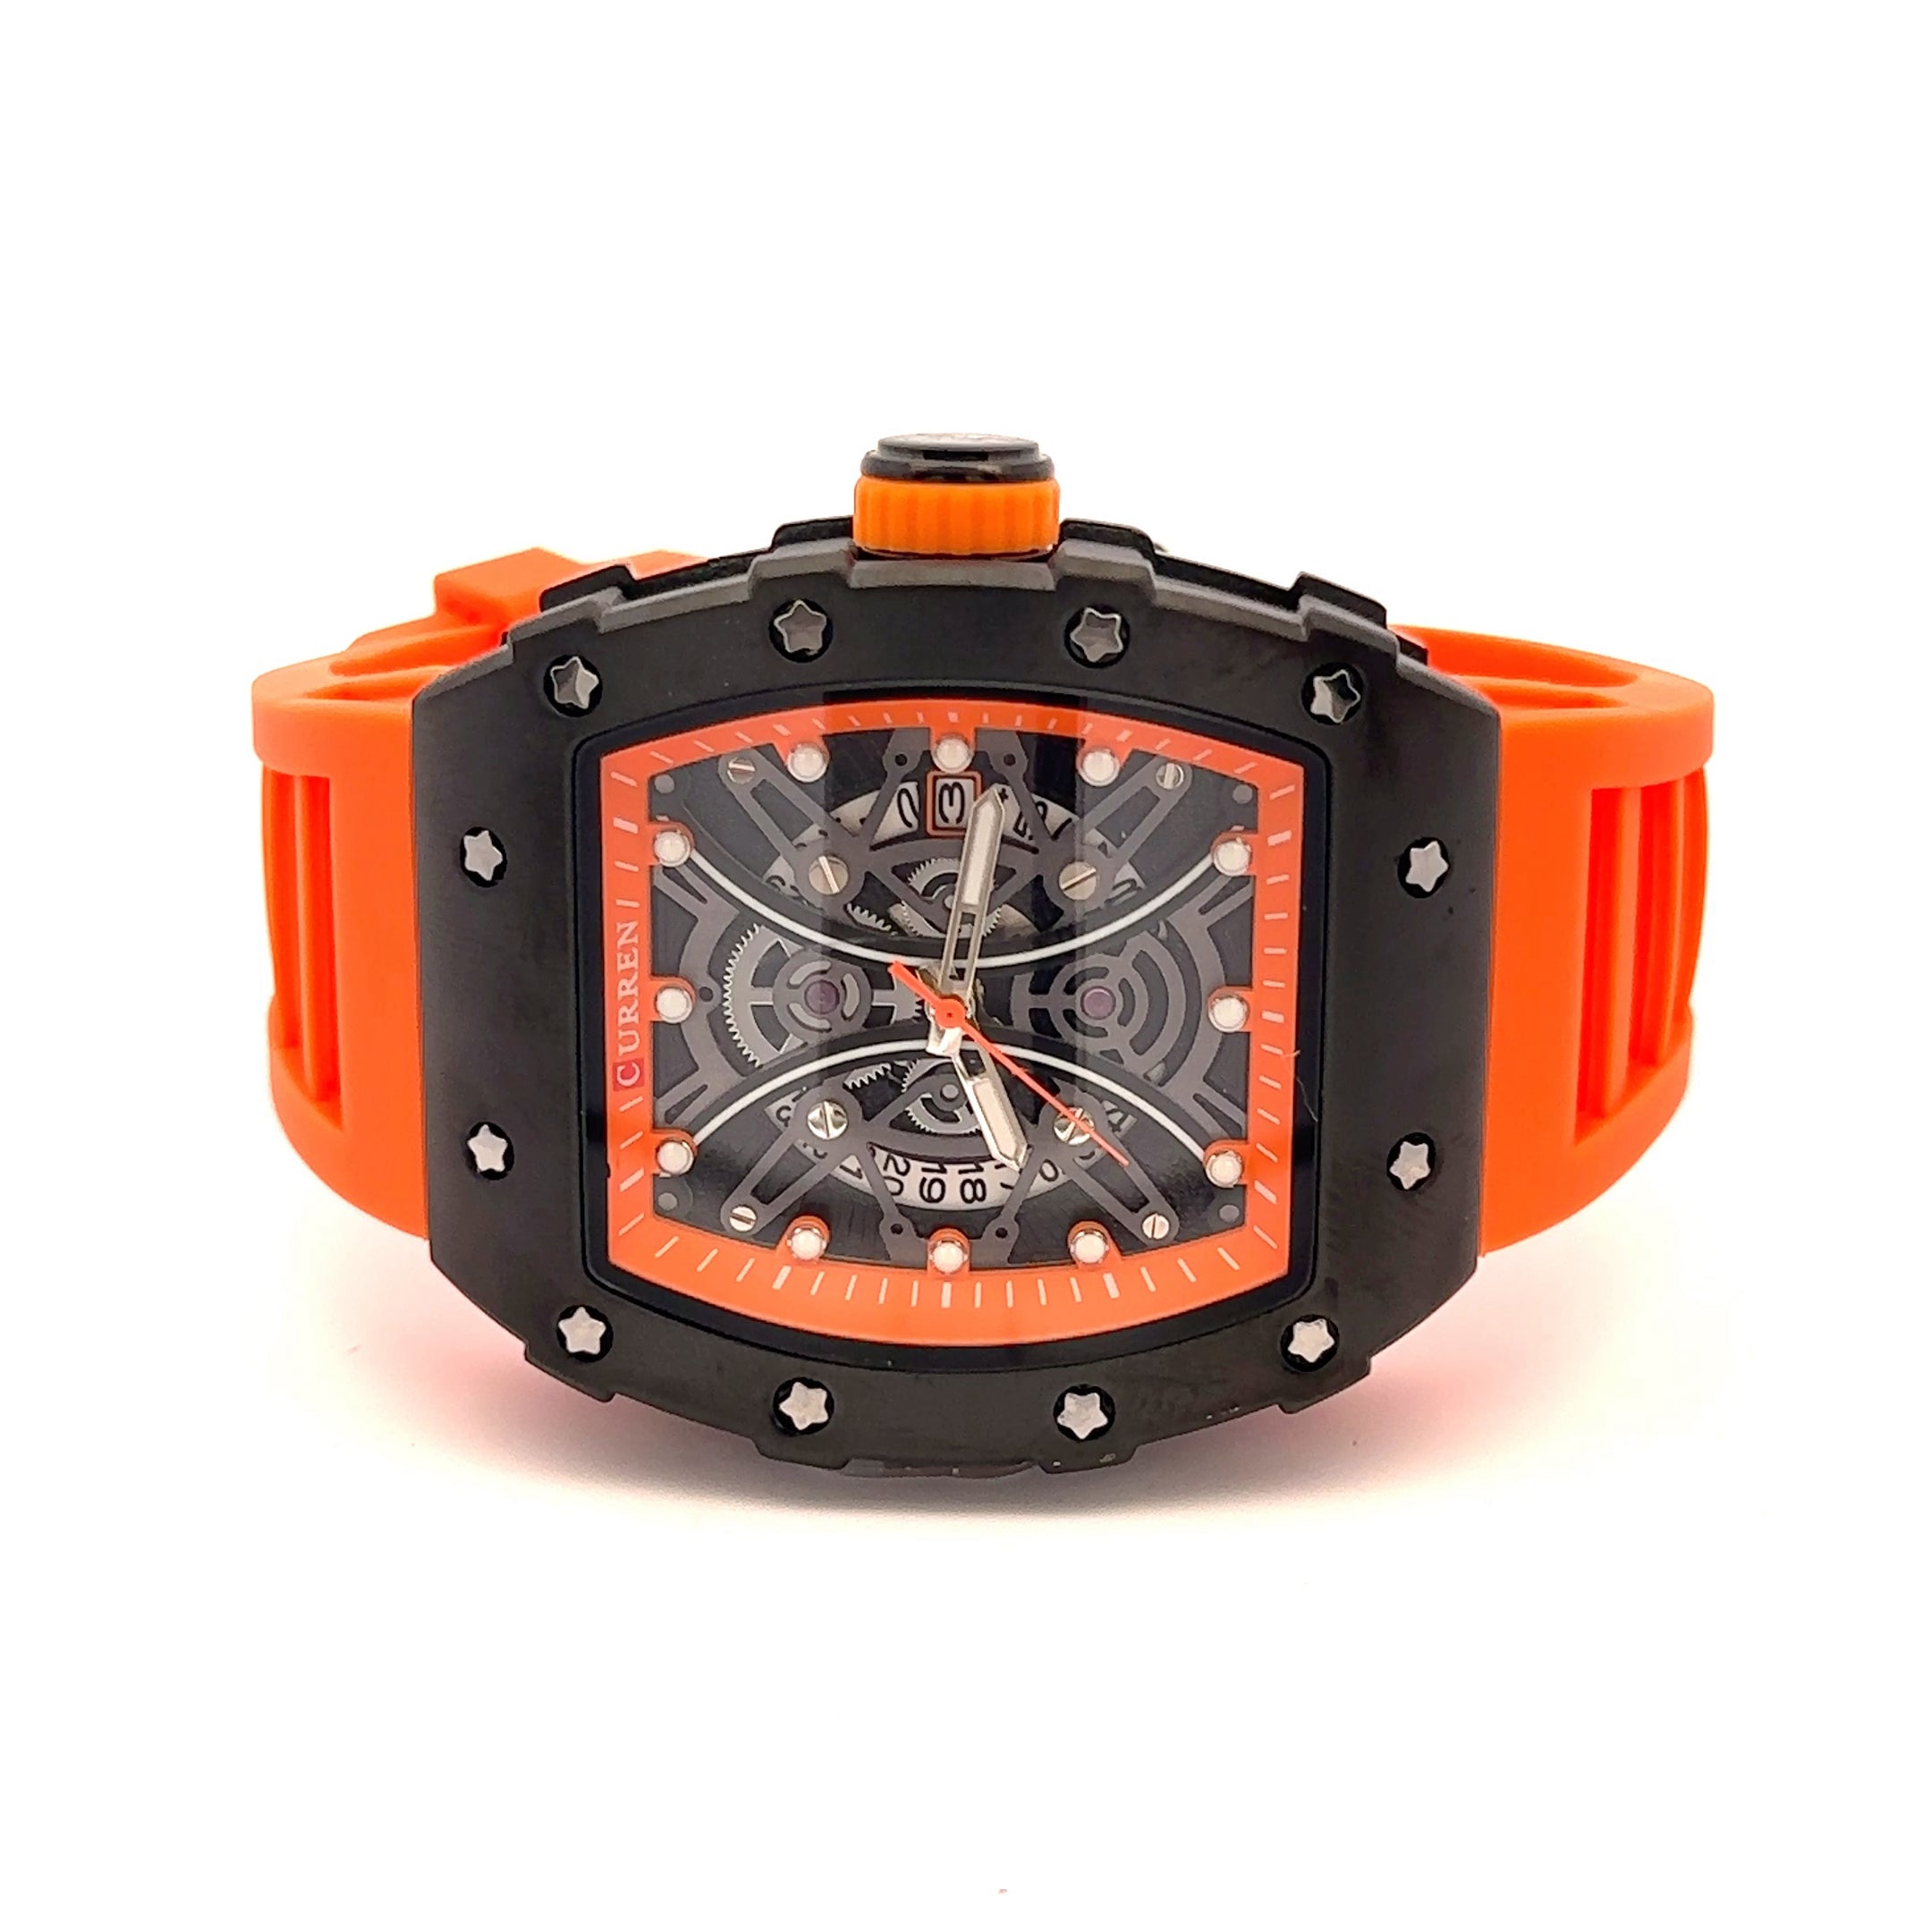 REVELAR CURREN ORANGE LEATHER ICED OUT WATCH I 5415625